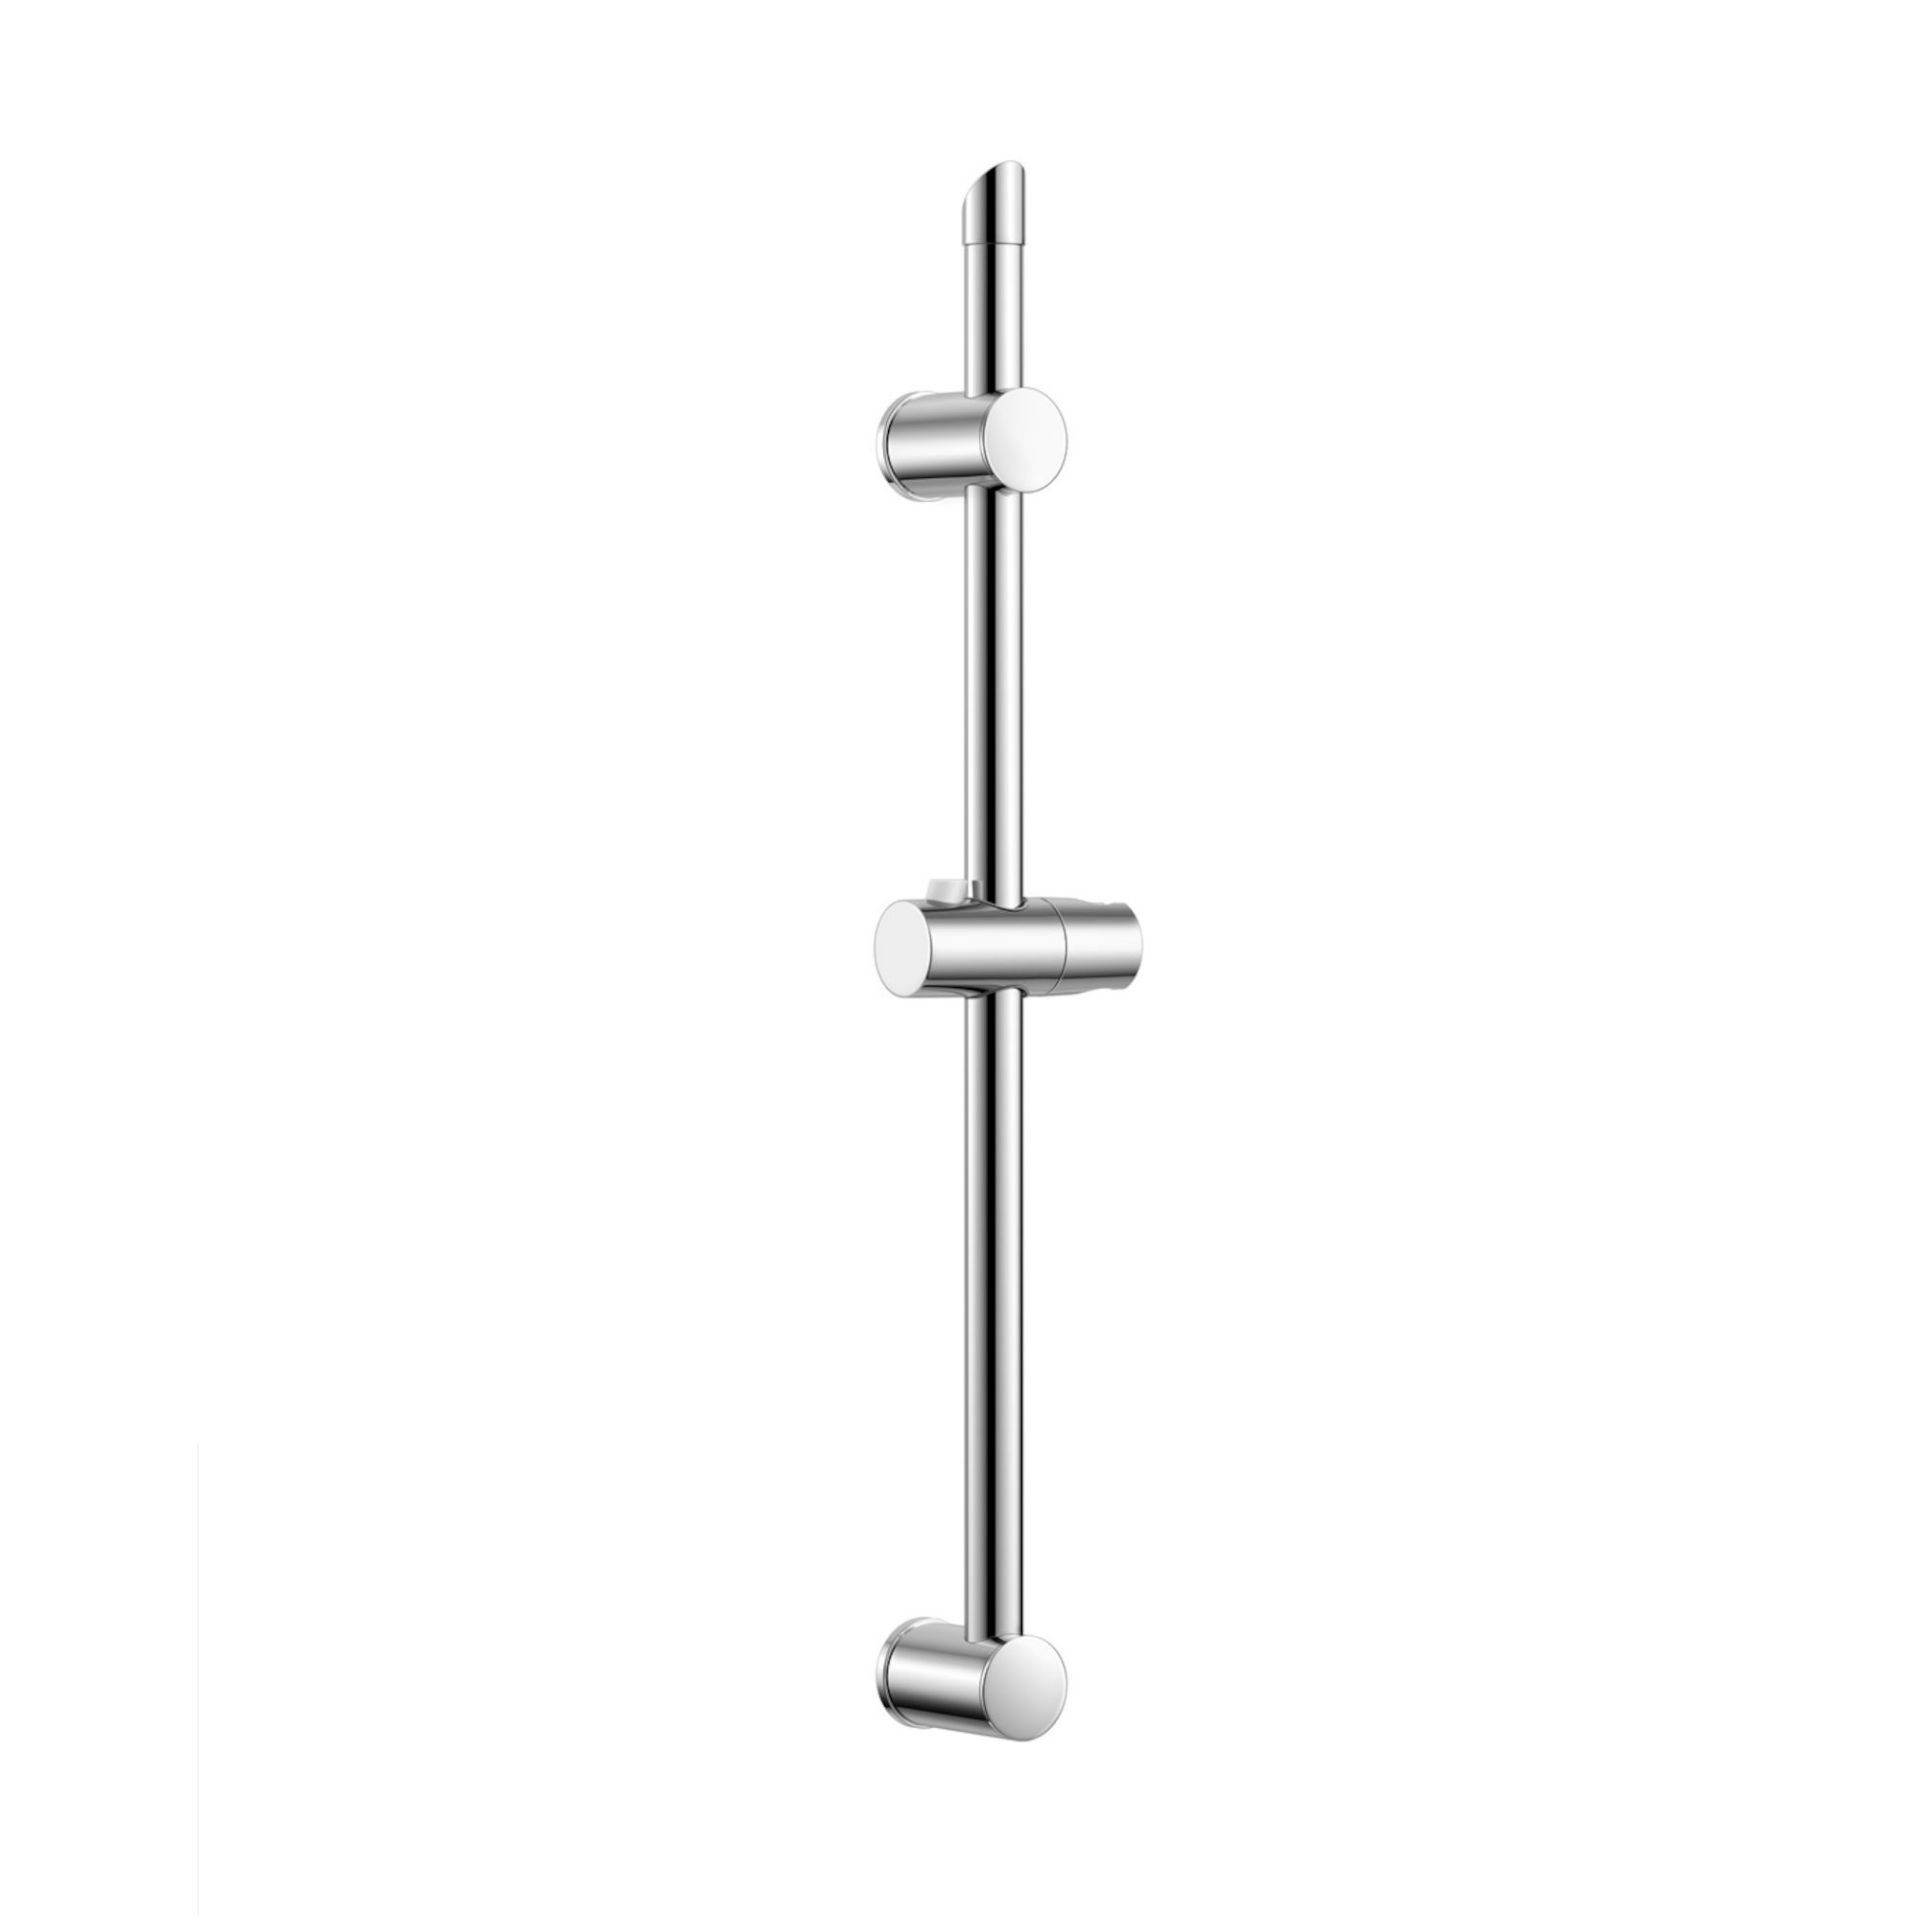 (PP1003) Round Stainless Steel Riser Rail Durable stainless steel body Polished chrome finish...